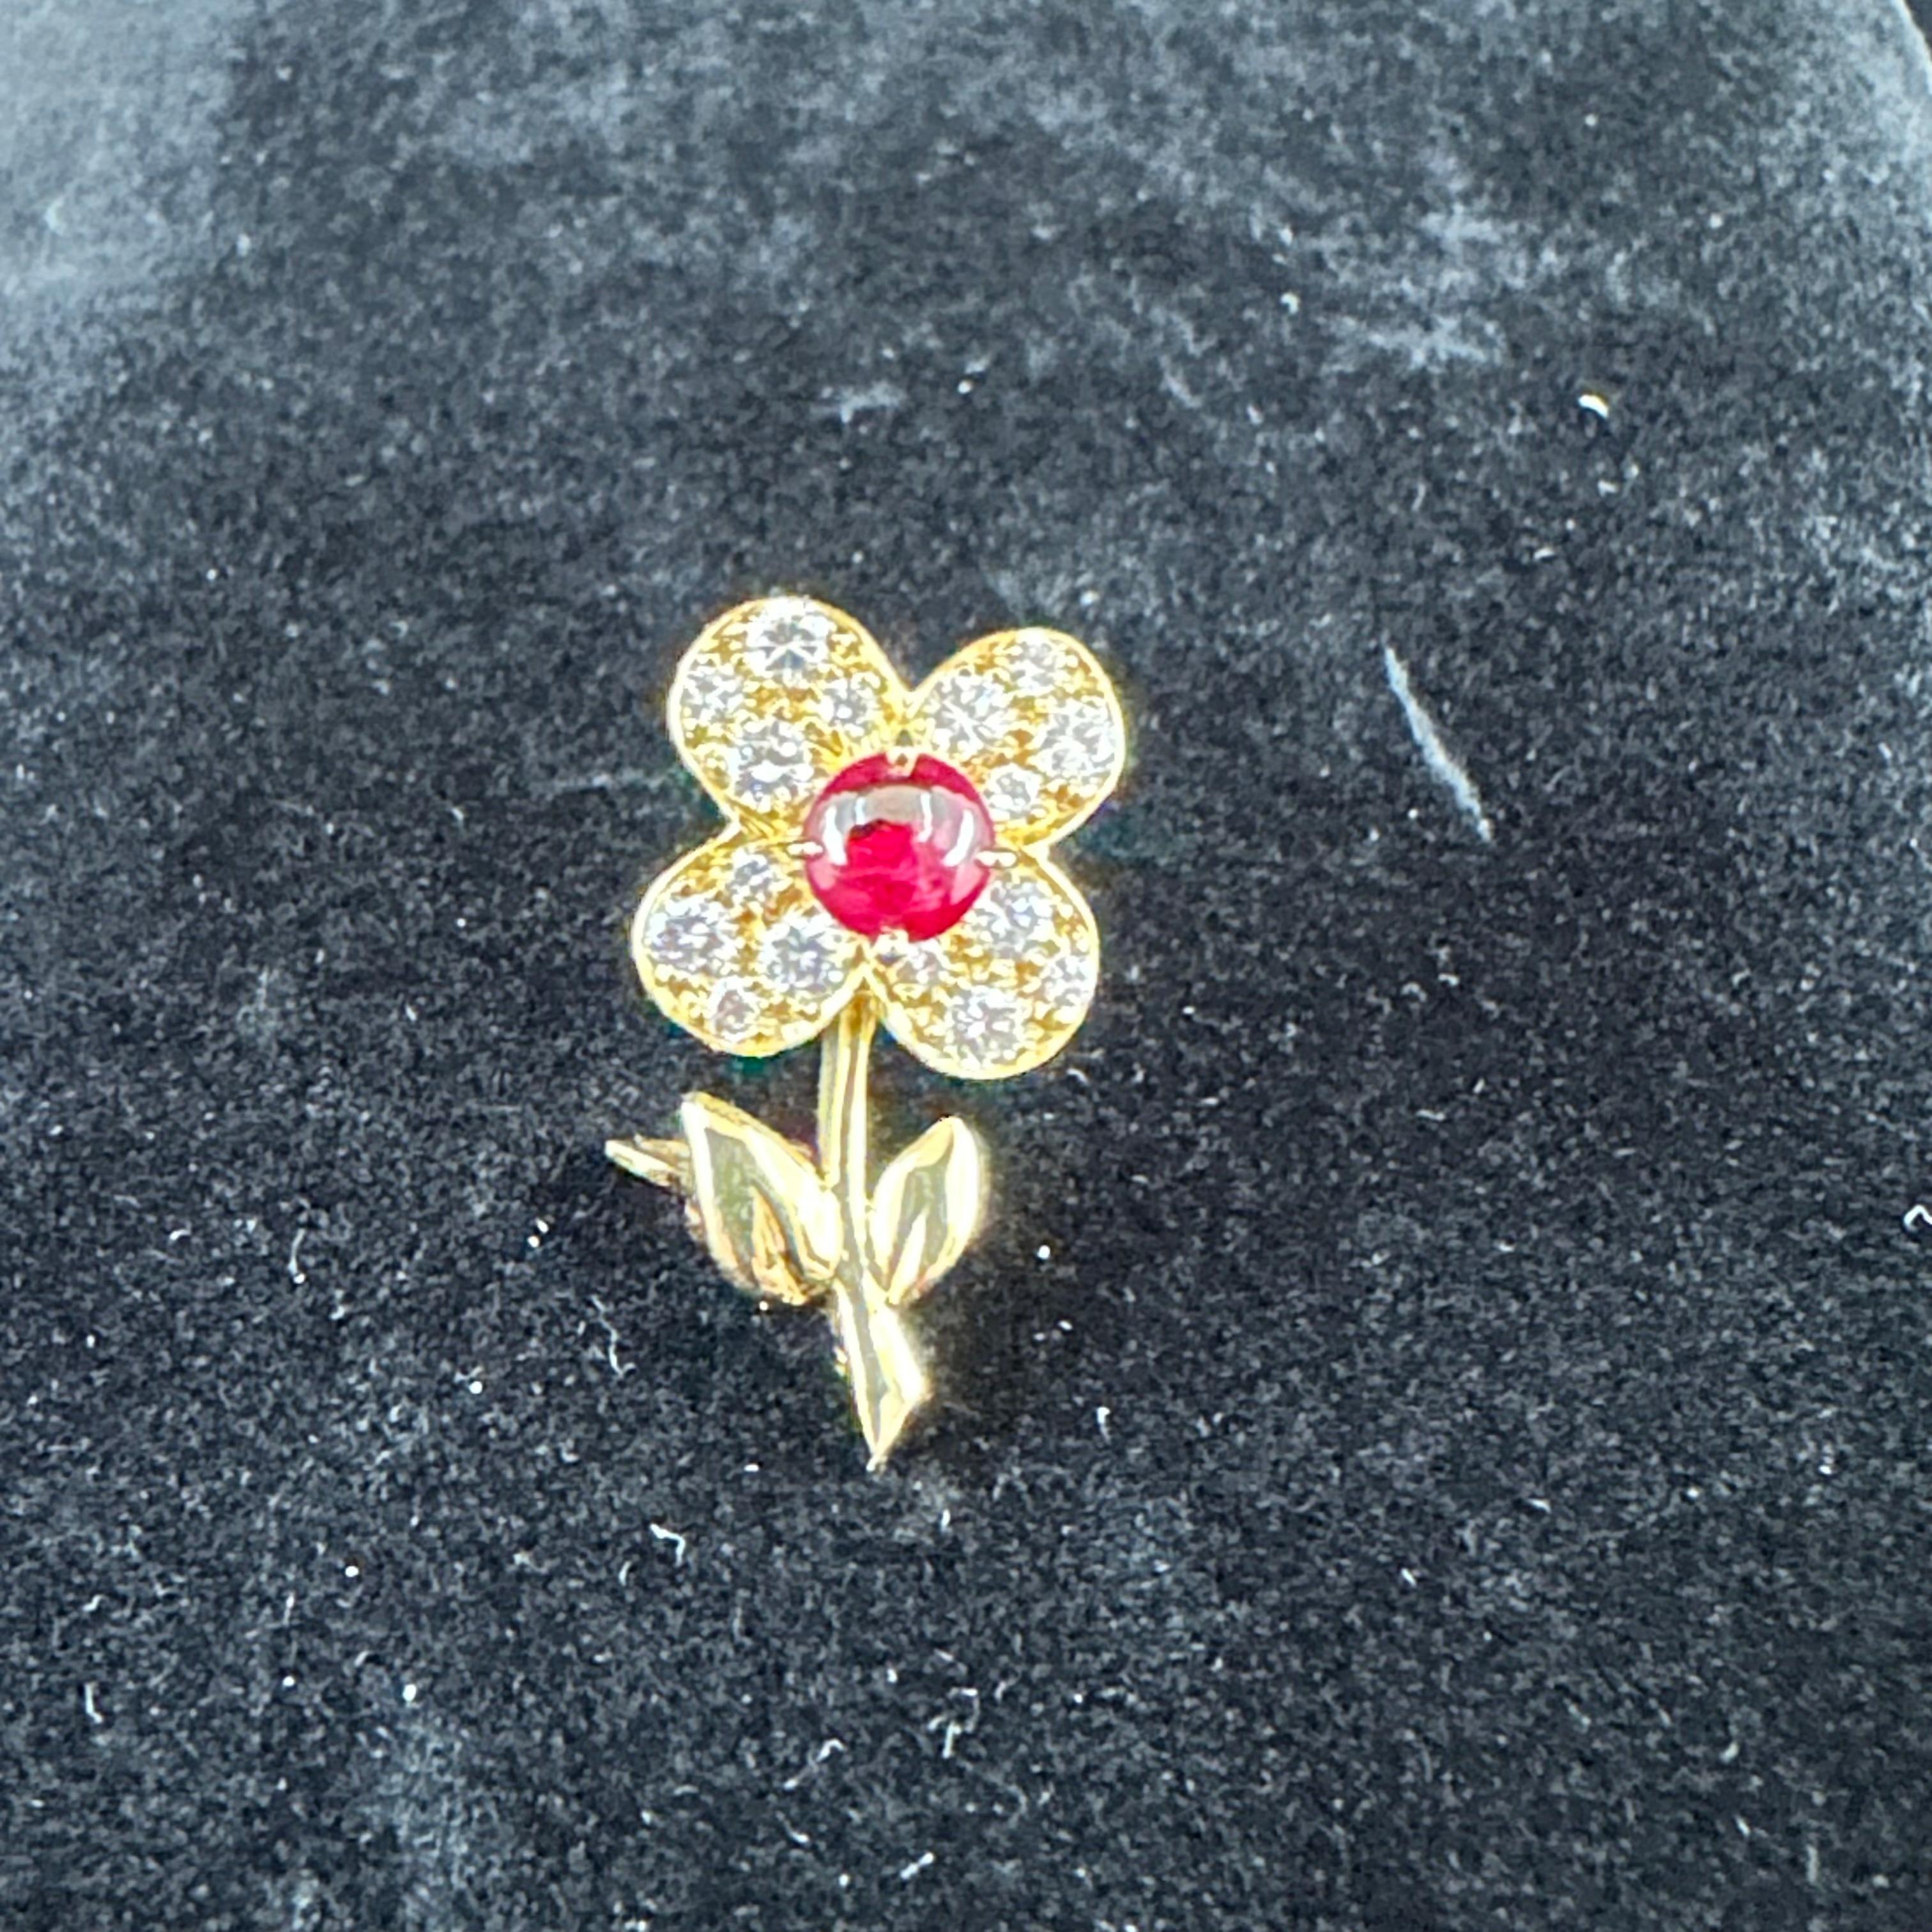 Brilliant Cut Van Cleef & Arpels Ruby Diamond Pin 18k Yellow Gold For Sale